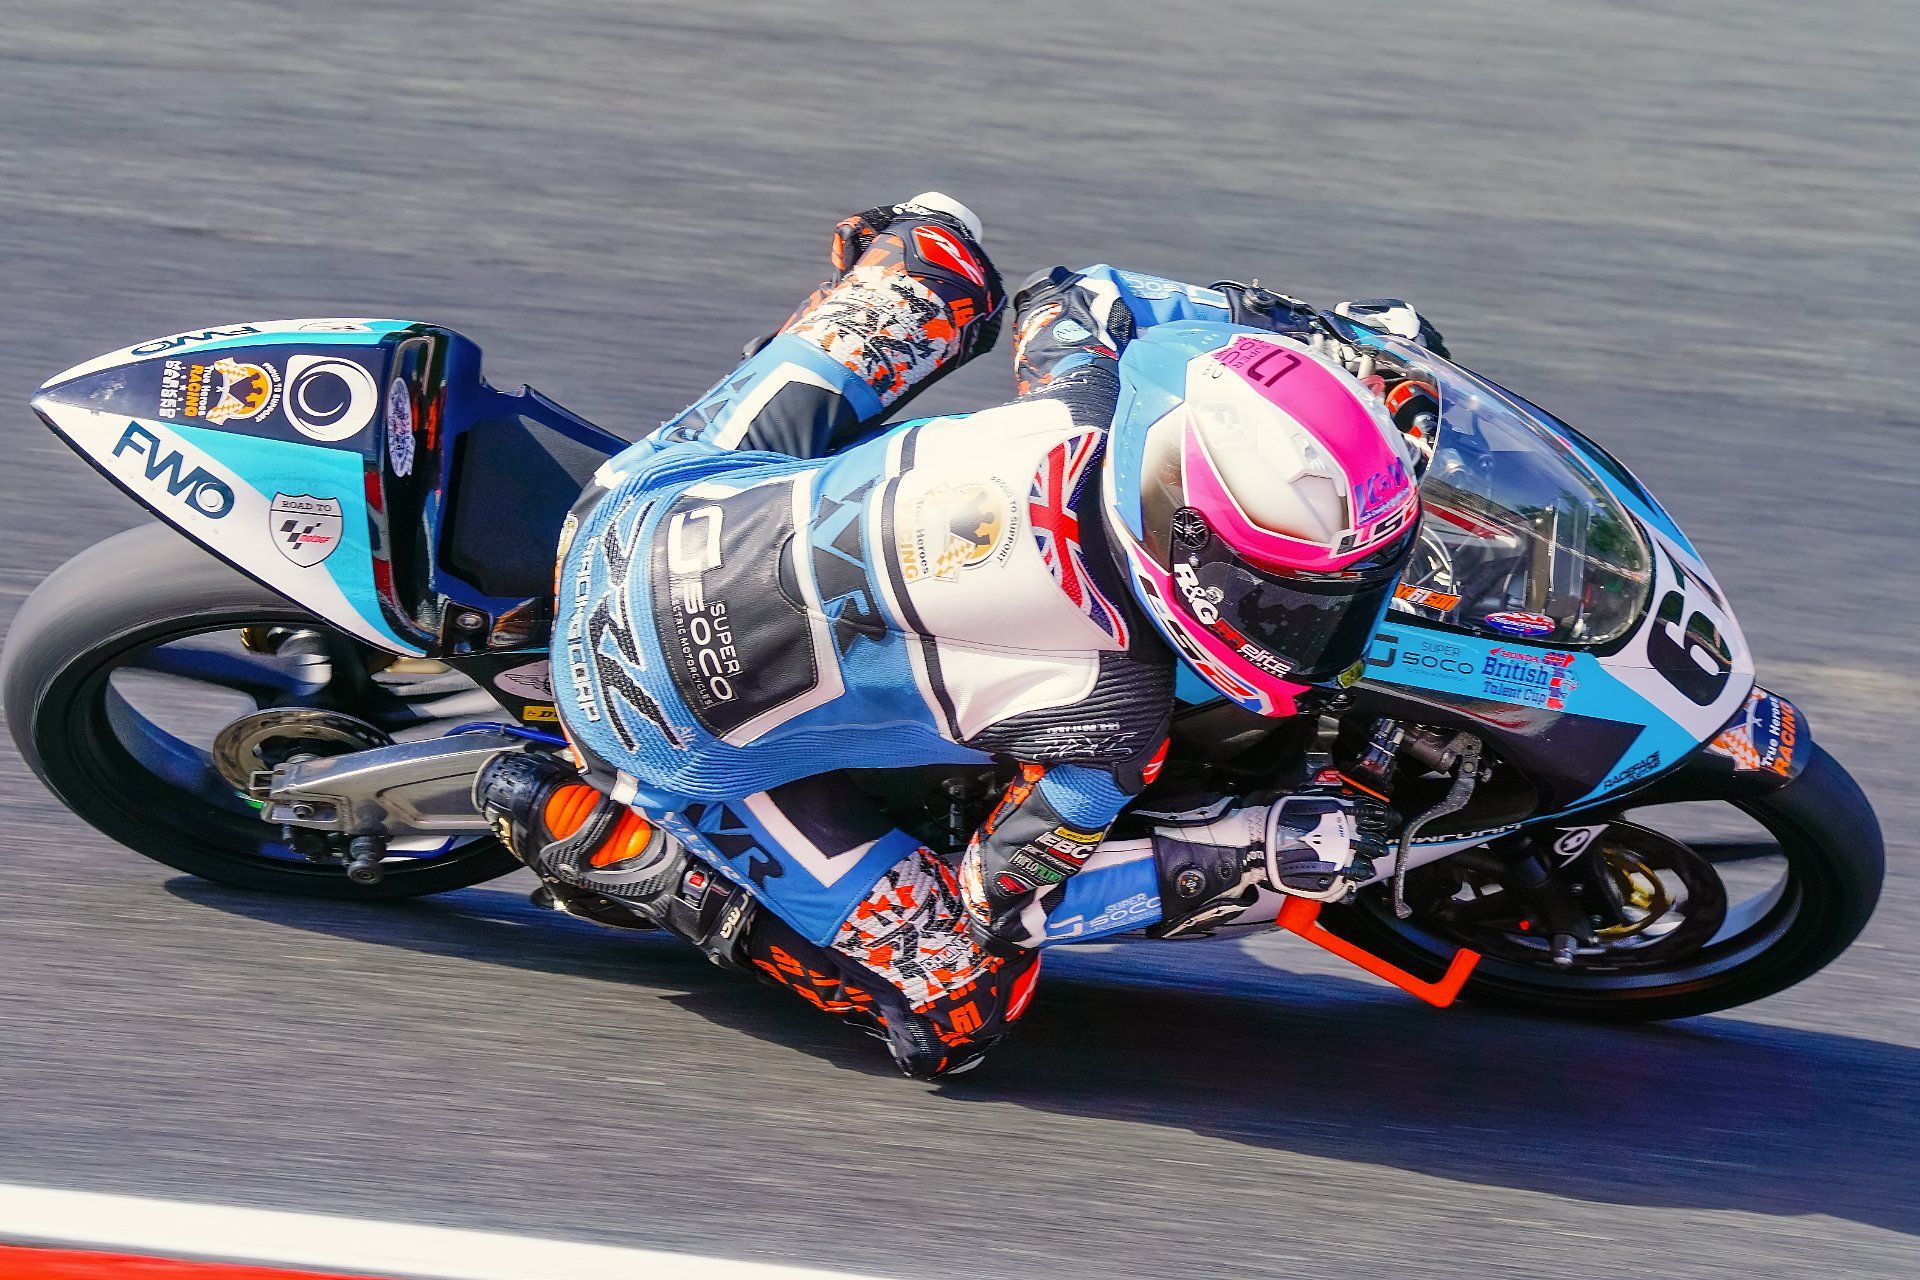 Harrison Mackay riding in the Honda British Talent Cup